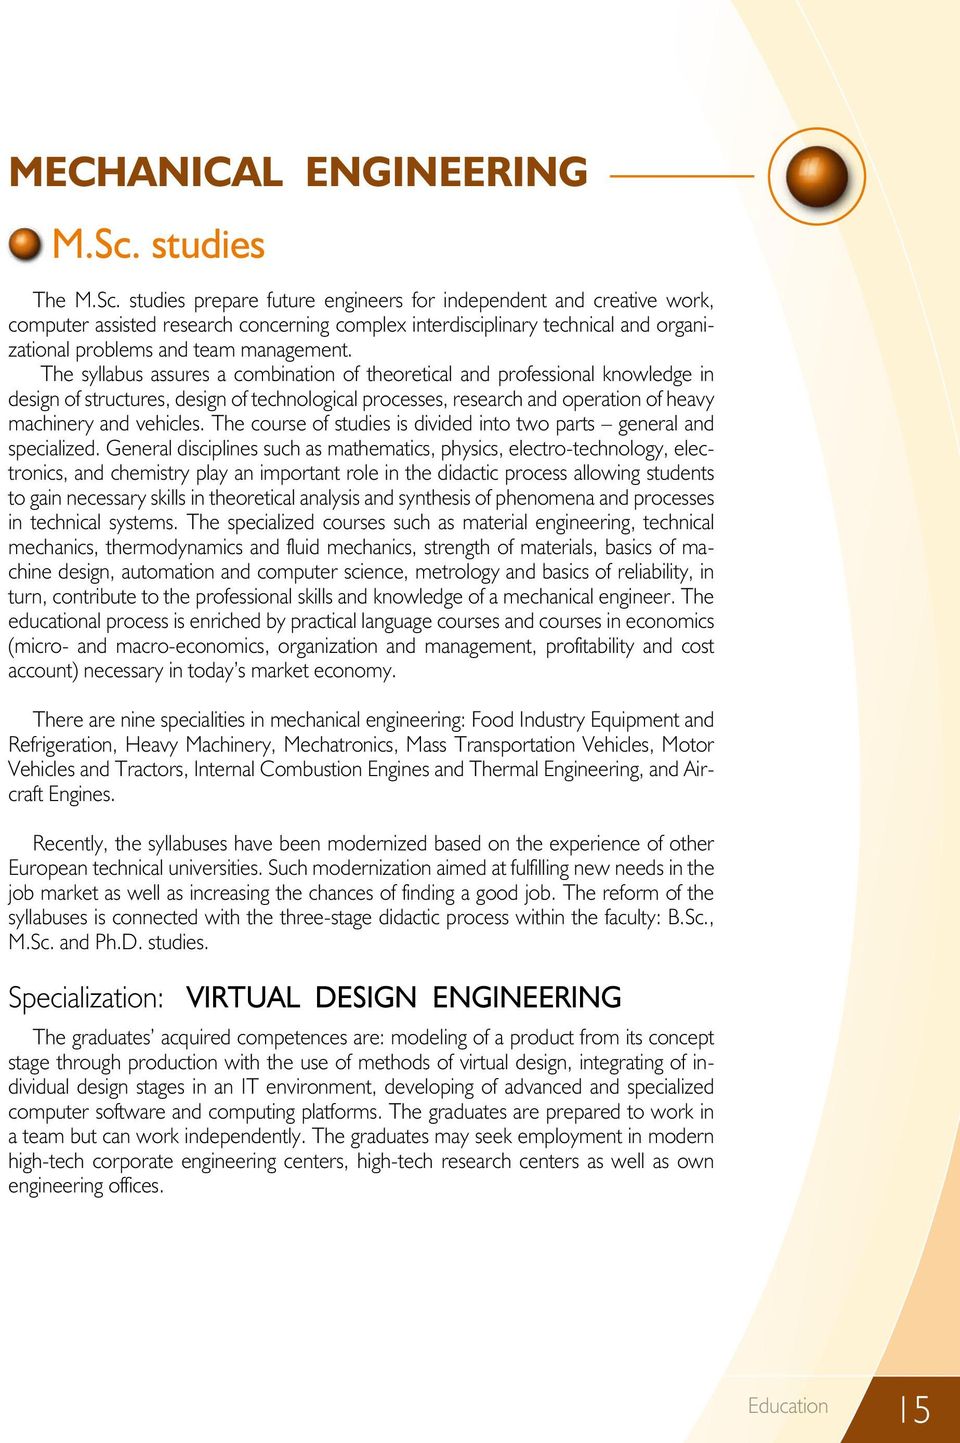 studies prepare future engineers for independent and creative work, computer assisted research concerning complex interdisciplinary technical and organizational problems and team management.